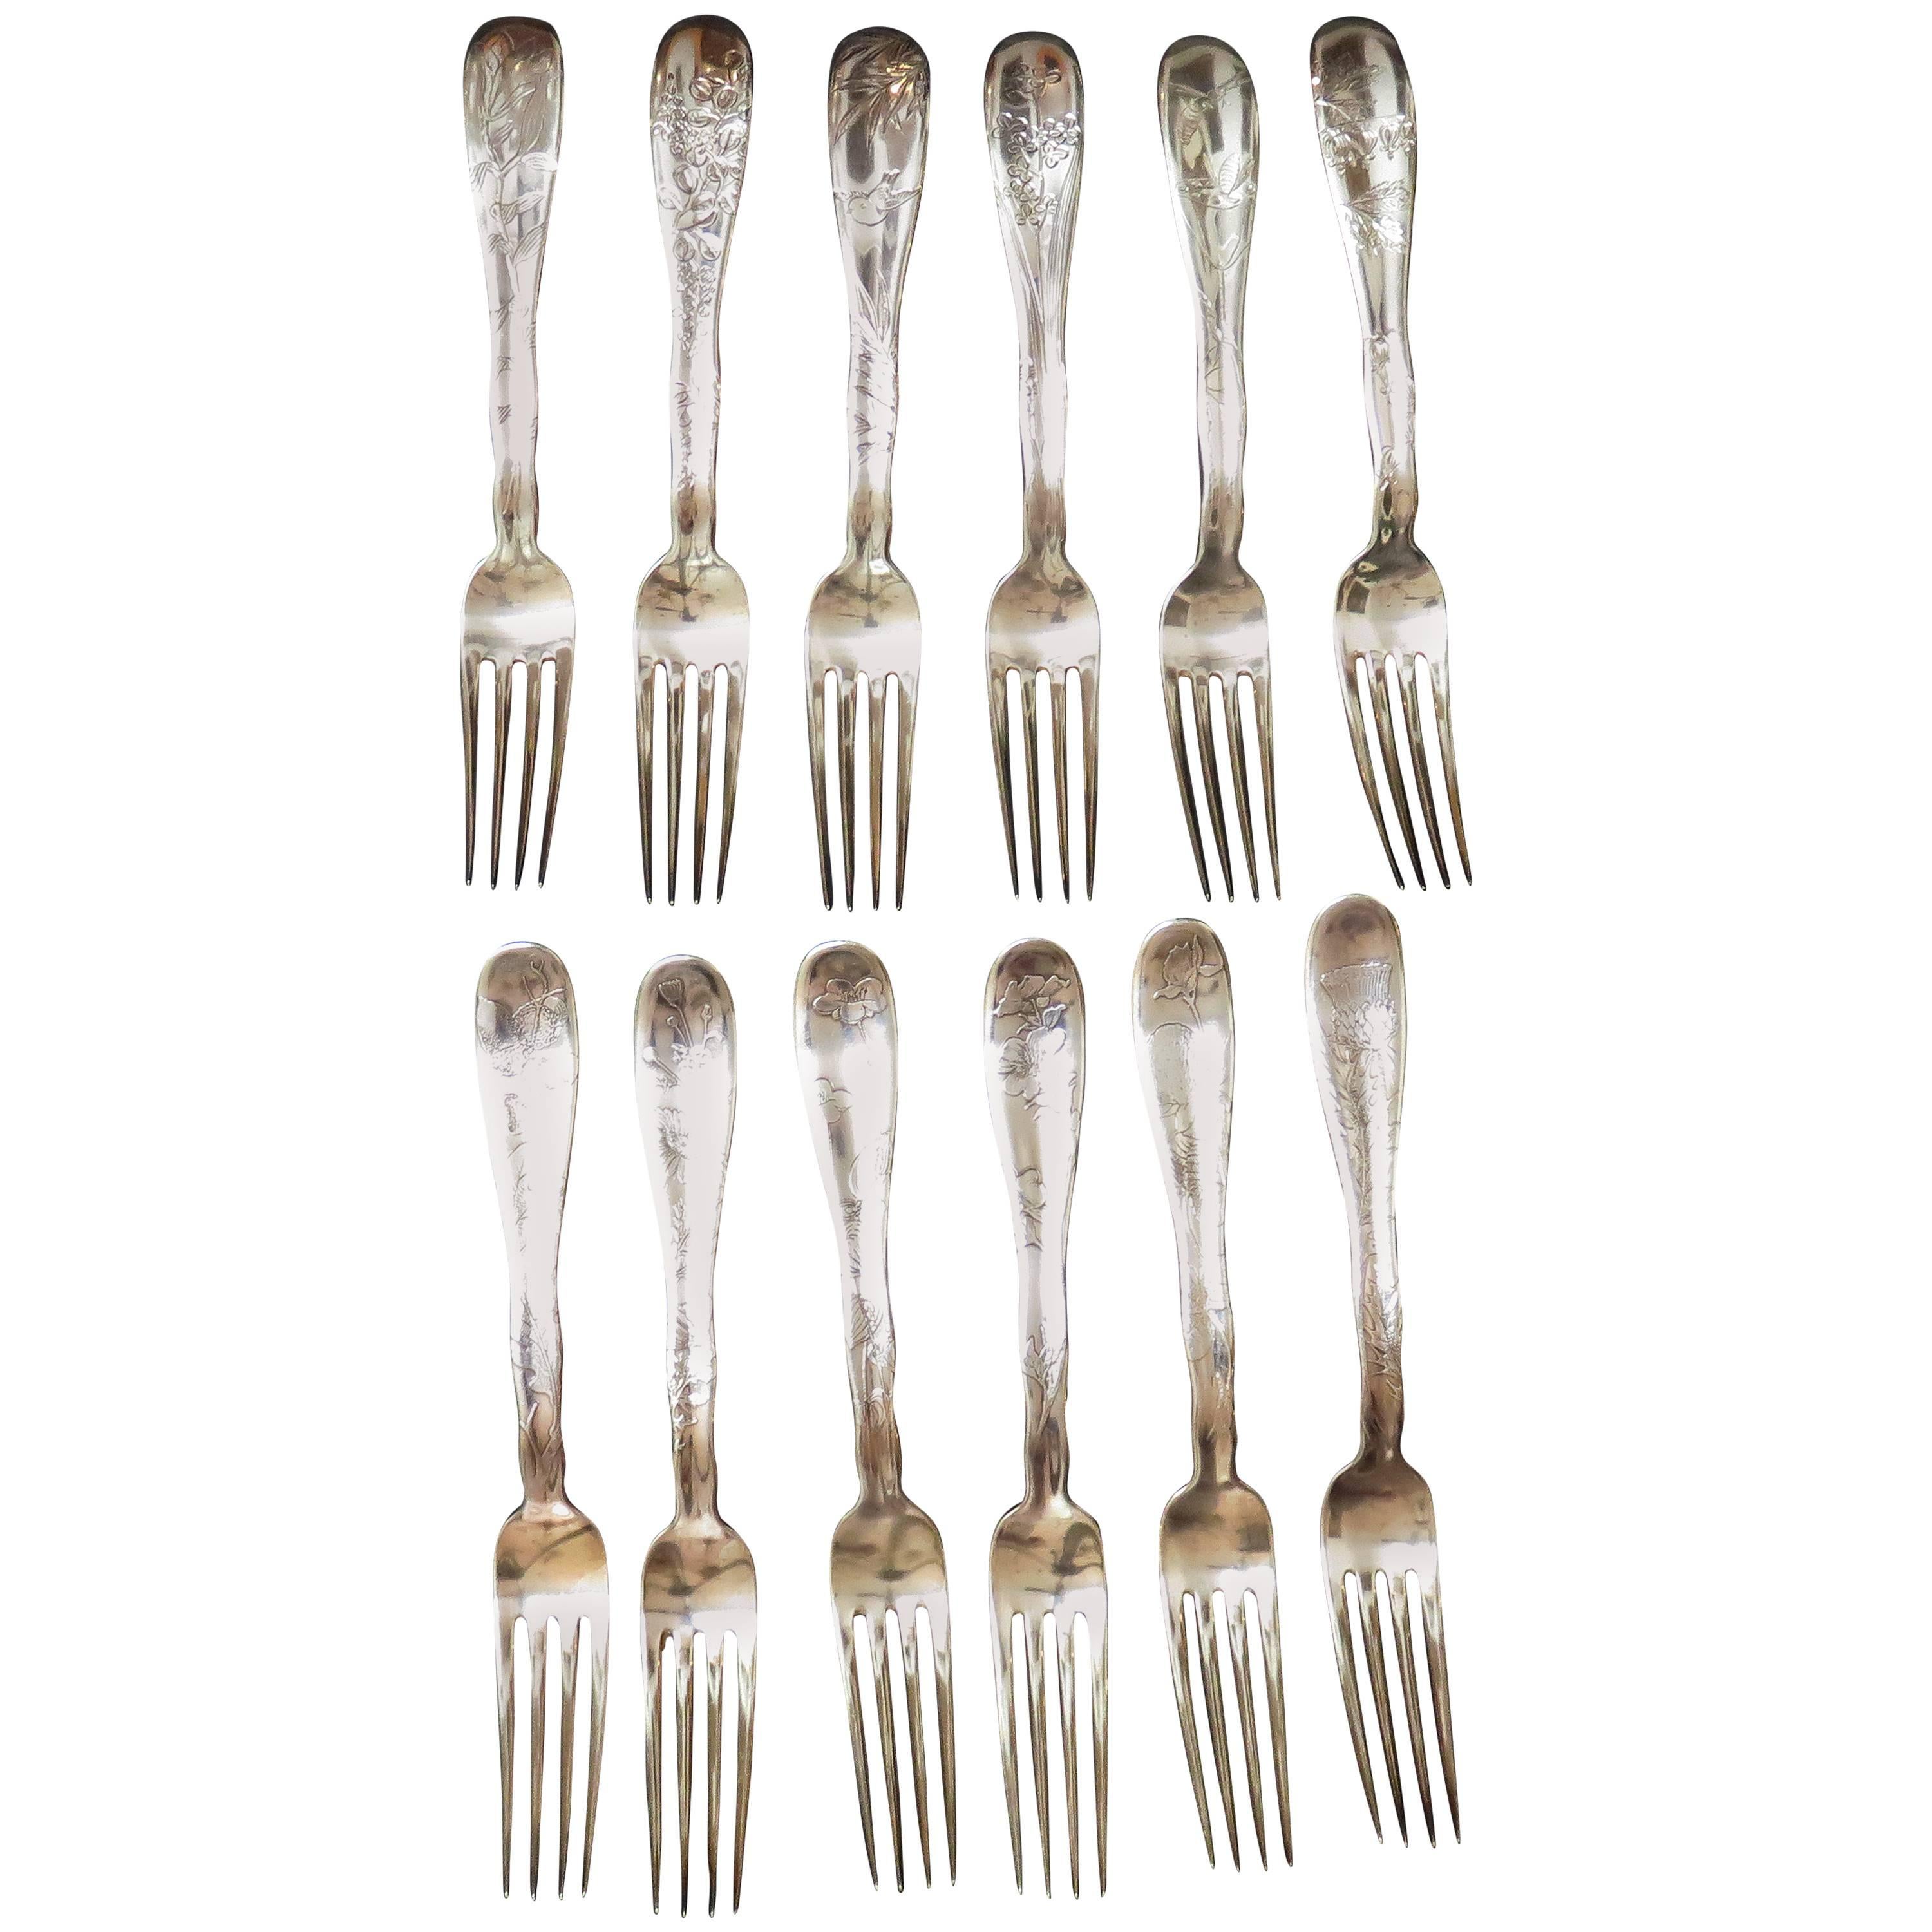 Tiffany & Company Lap over Edge Acid Etched Dinner Forks, circa 1880 For Sale